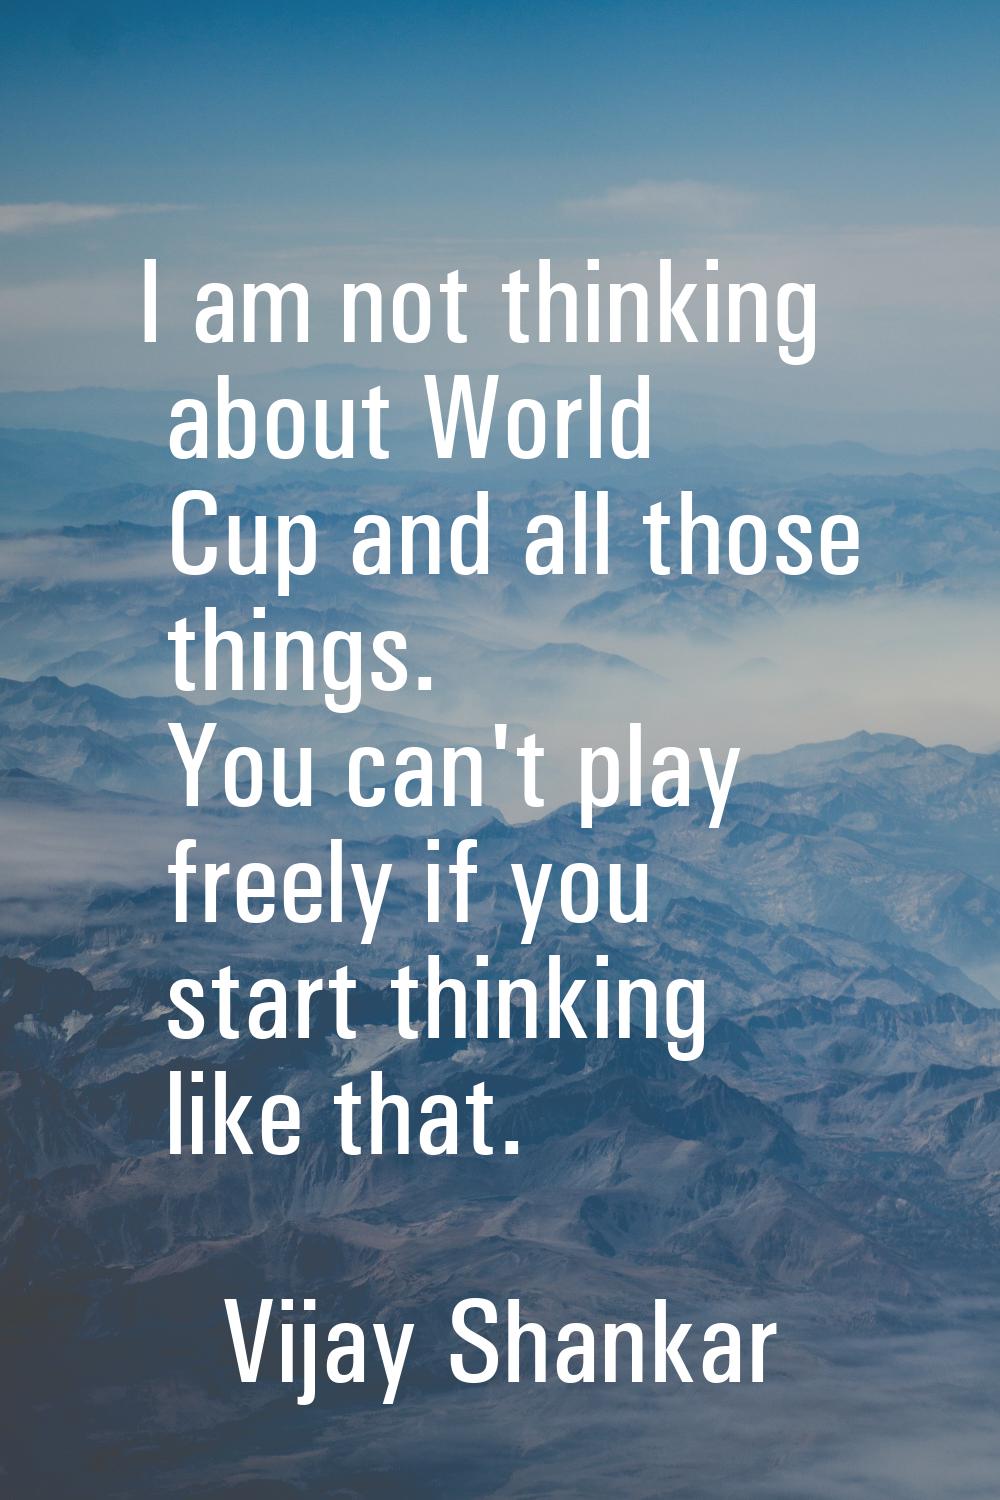 I am not thinking about World Cup and all those things. You can't play freely if you start thinking